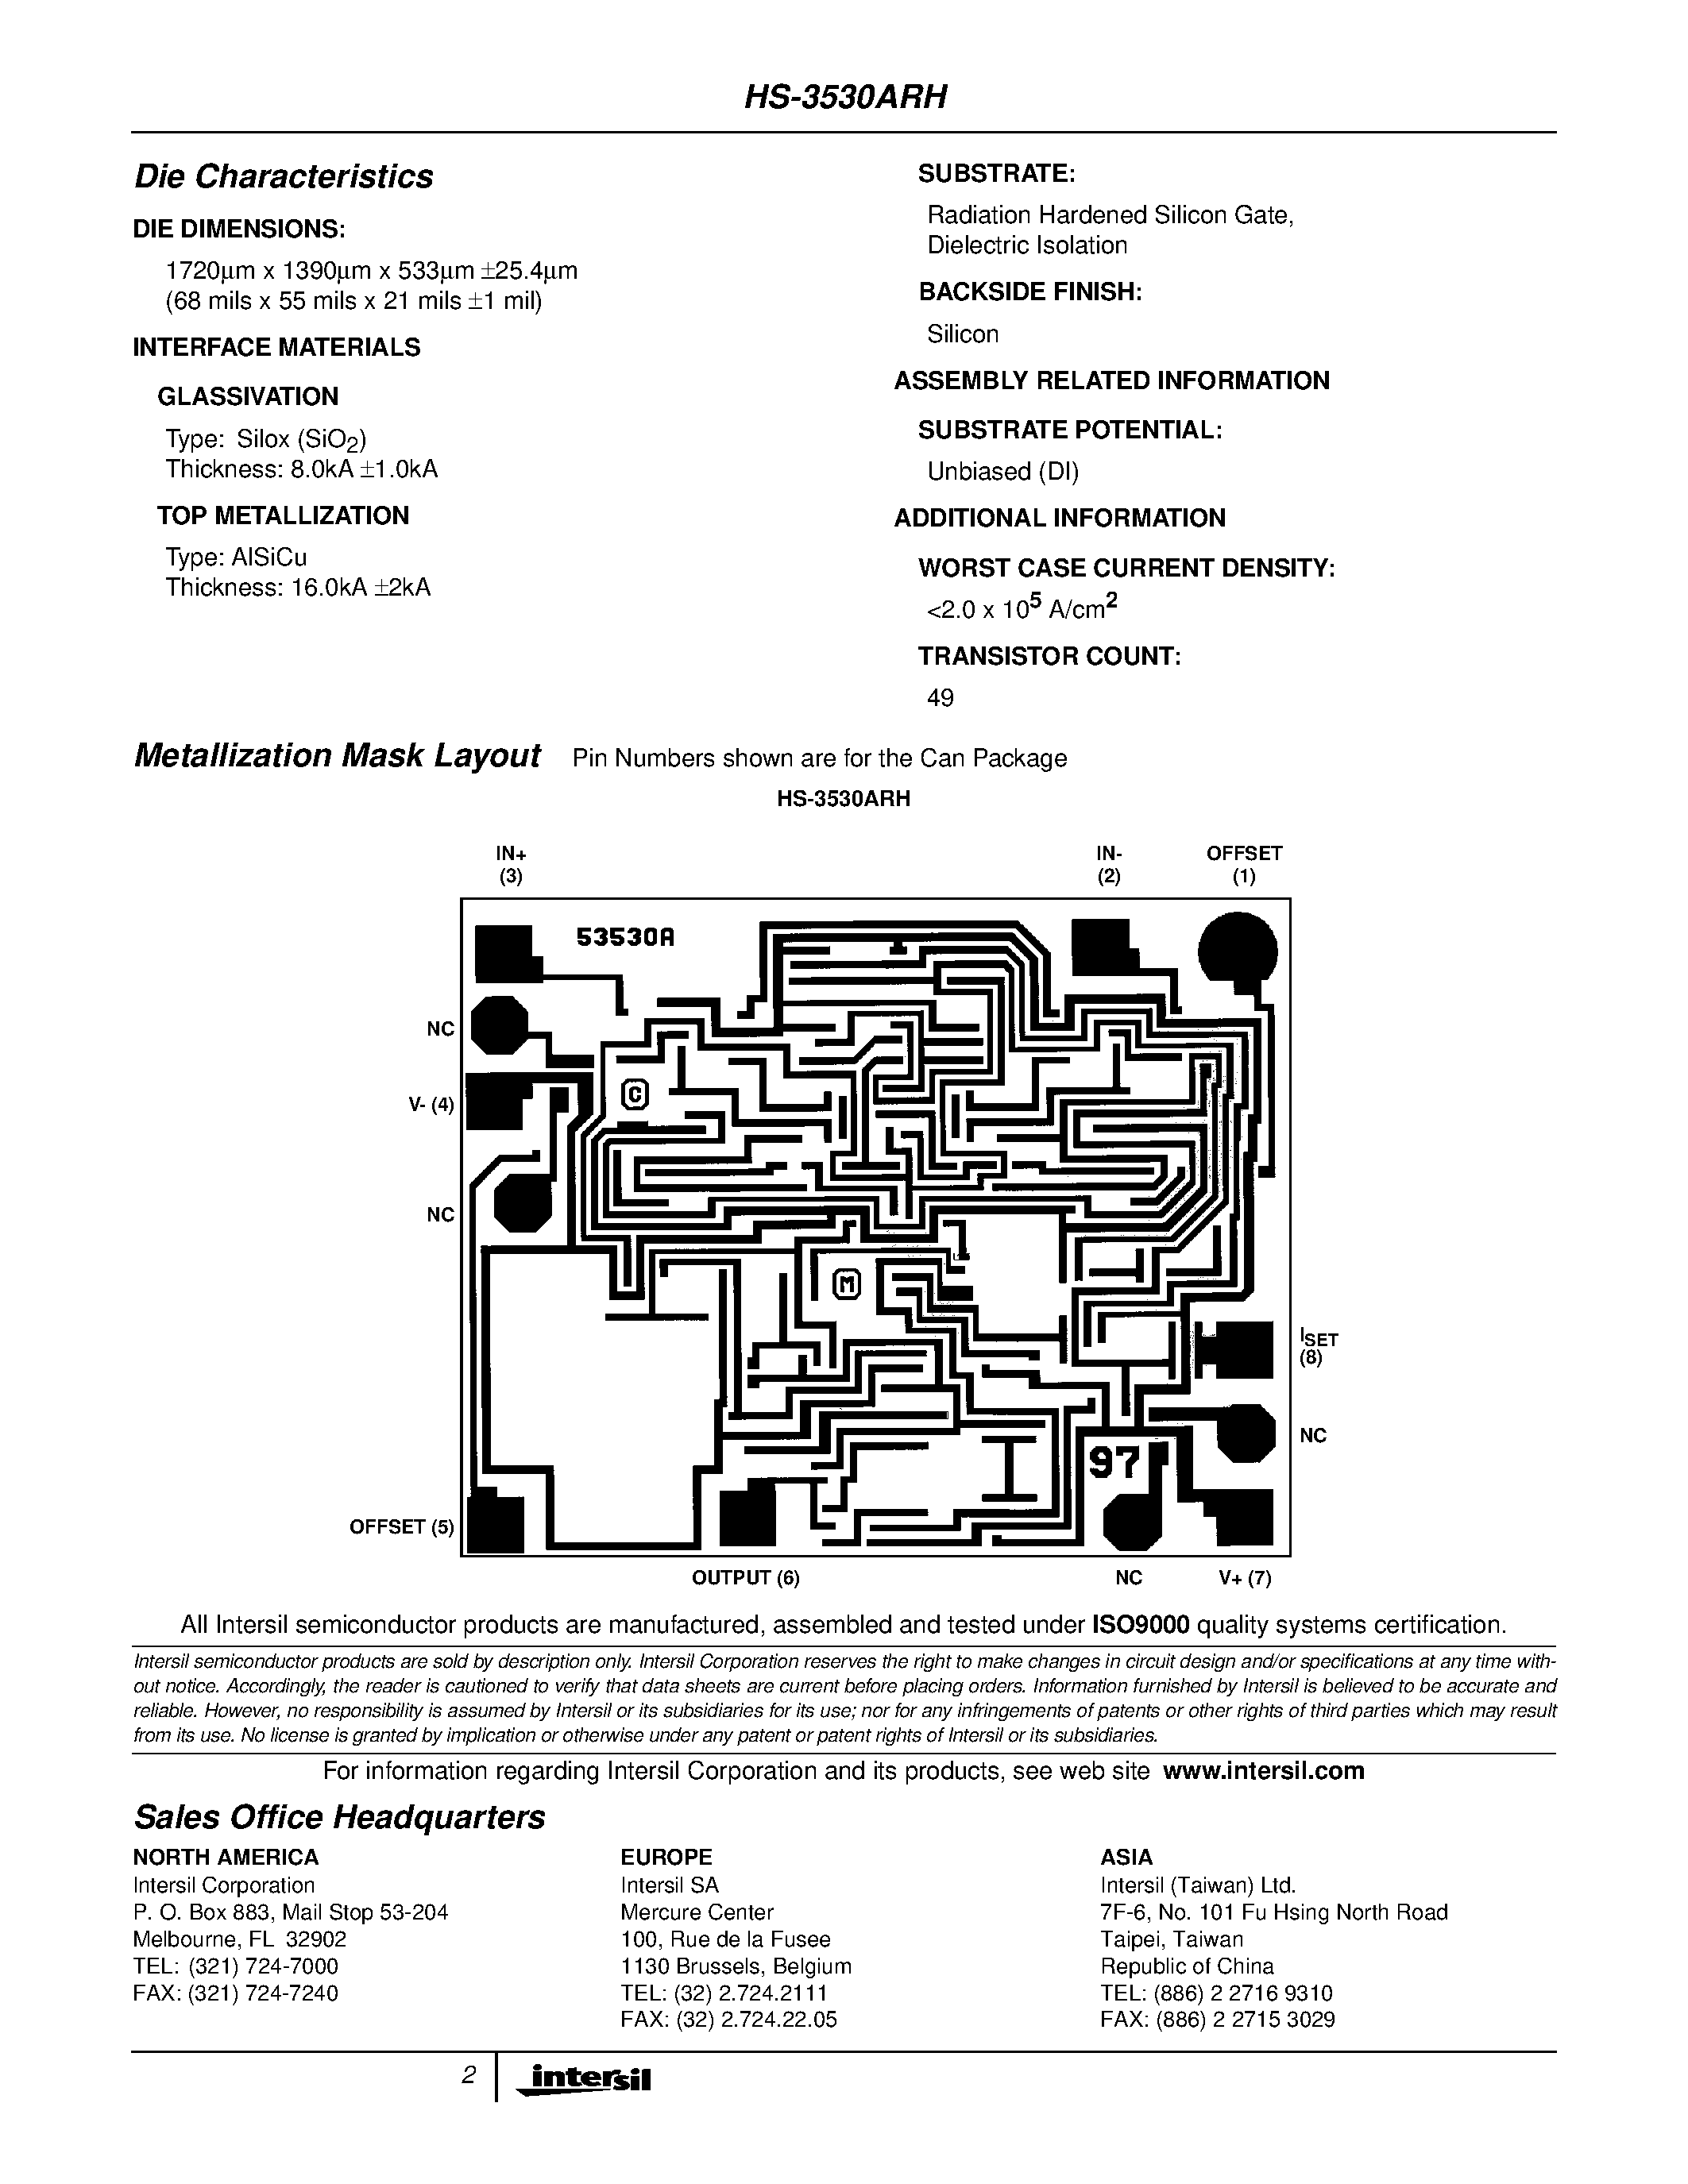 Datasheet HS9-3530ARH-Q - Radiation Hardened Programmable Low Power Op Amp page 2